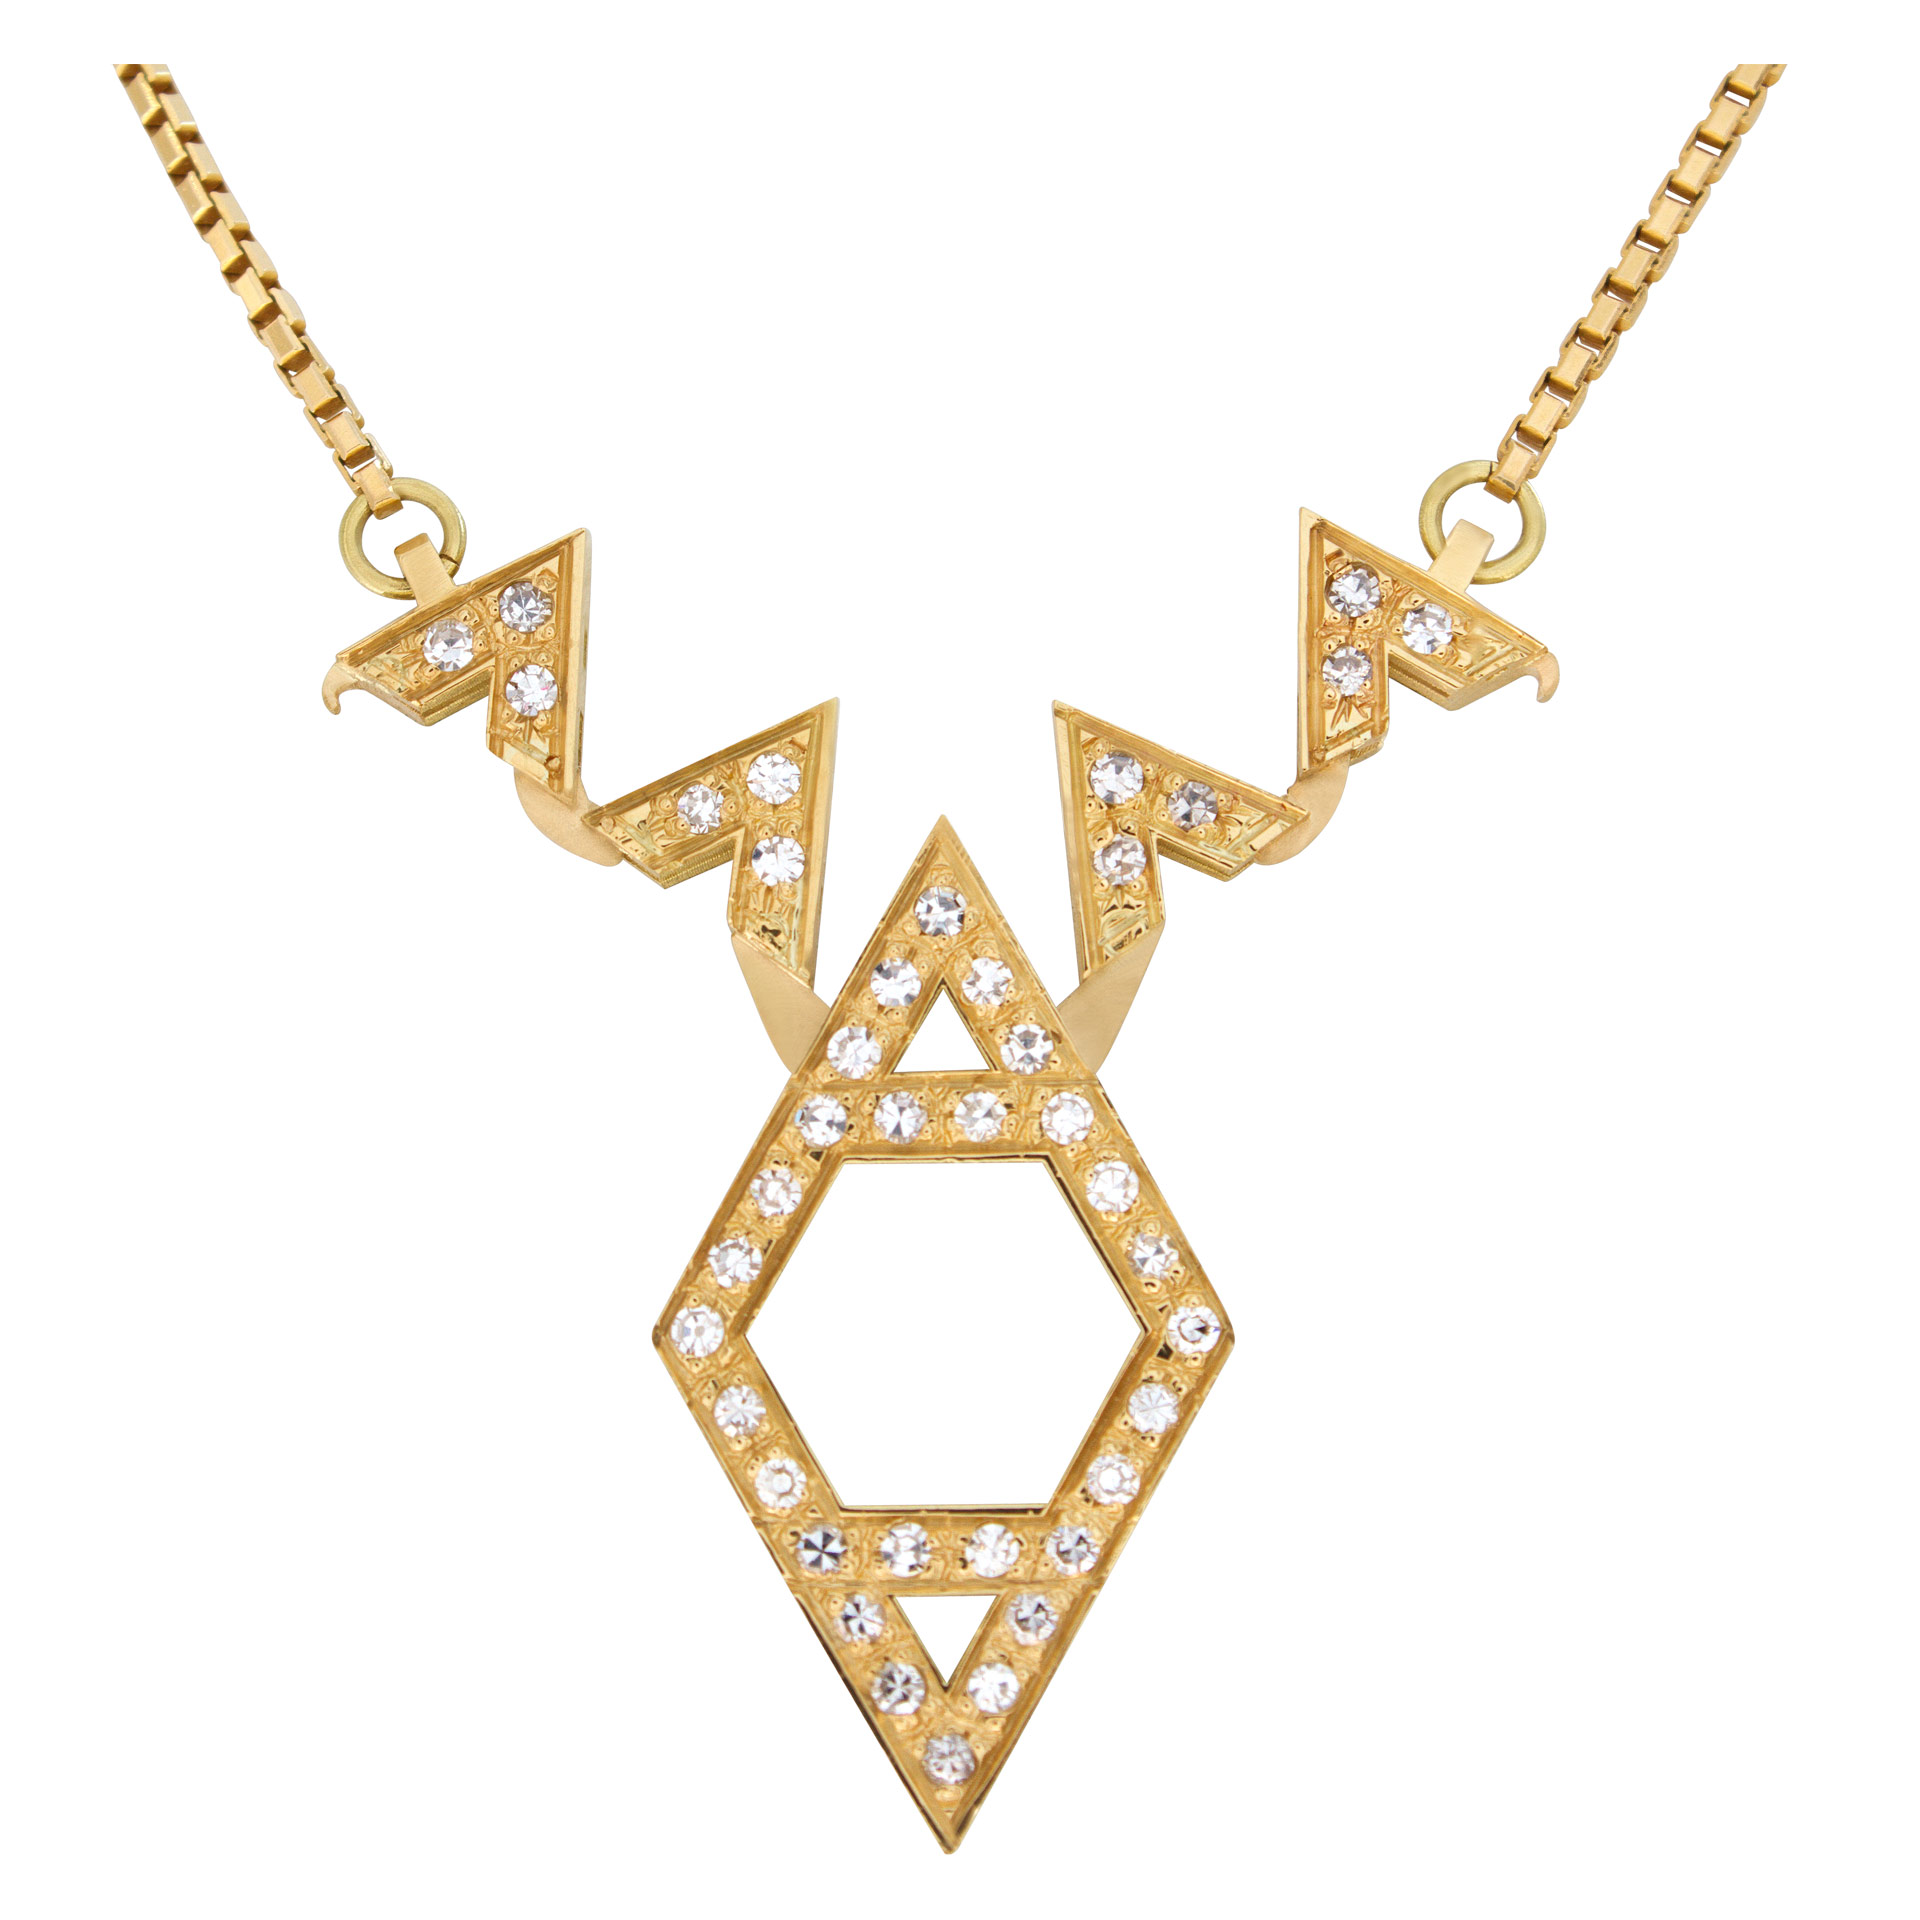 "Star of David" pendant with approximately 0.75 carat pave diamonds set in 18k yellow gold image 5